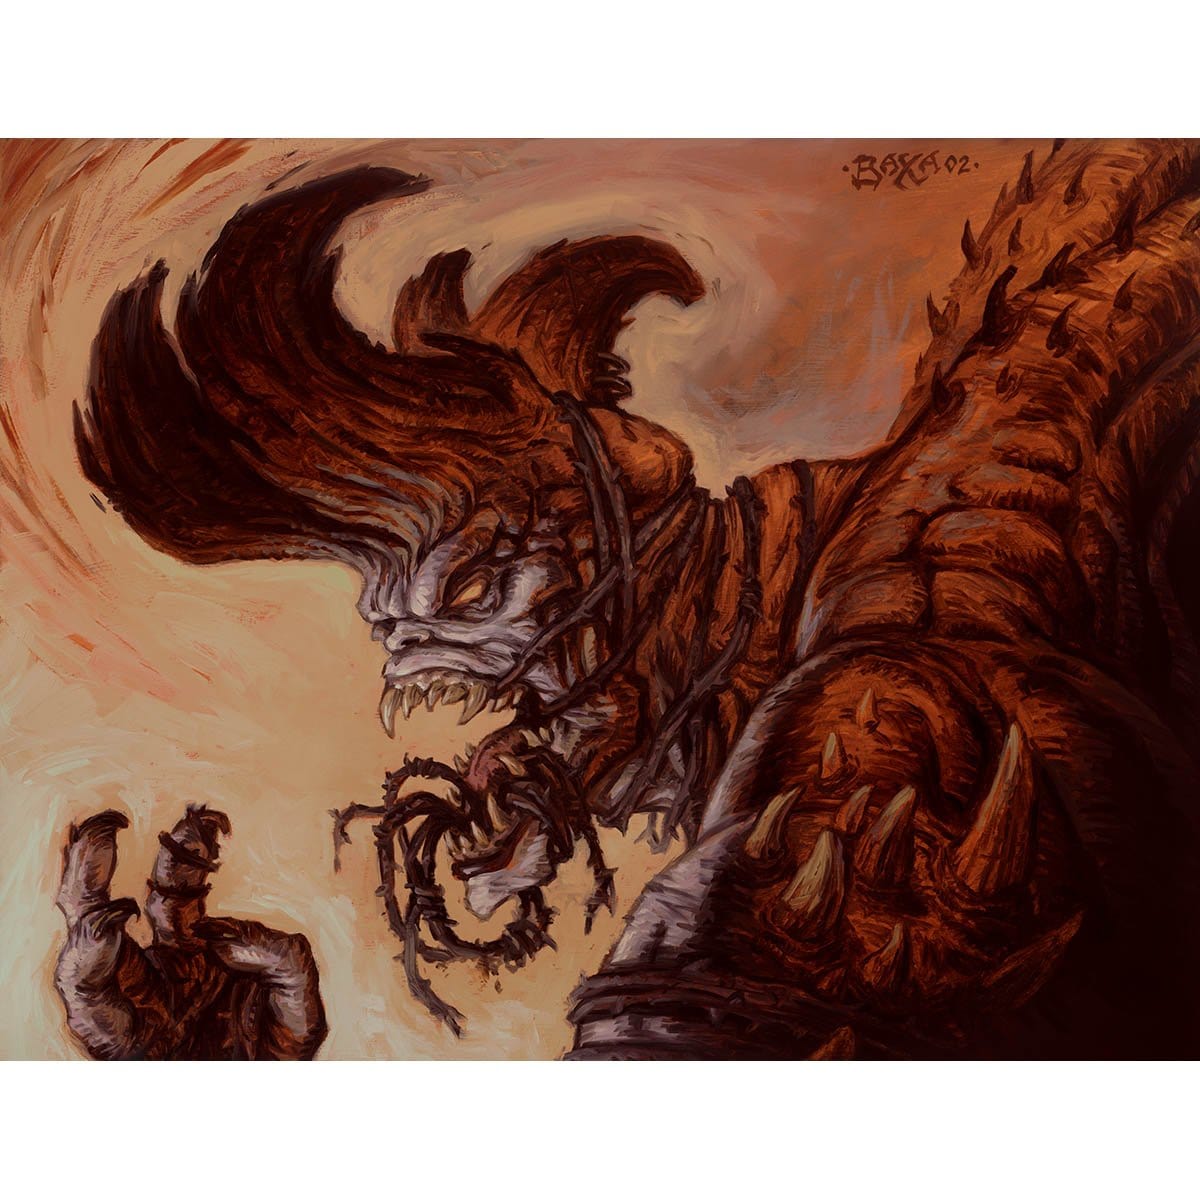 Havoc Demon Print - Print - Original Magic Art - Accessories for Magic the Gathering and other card games